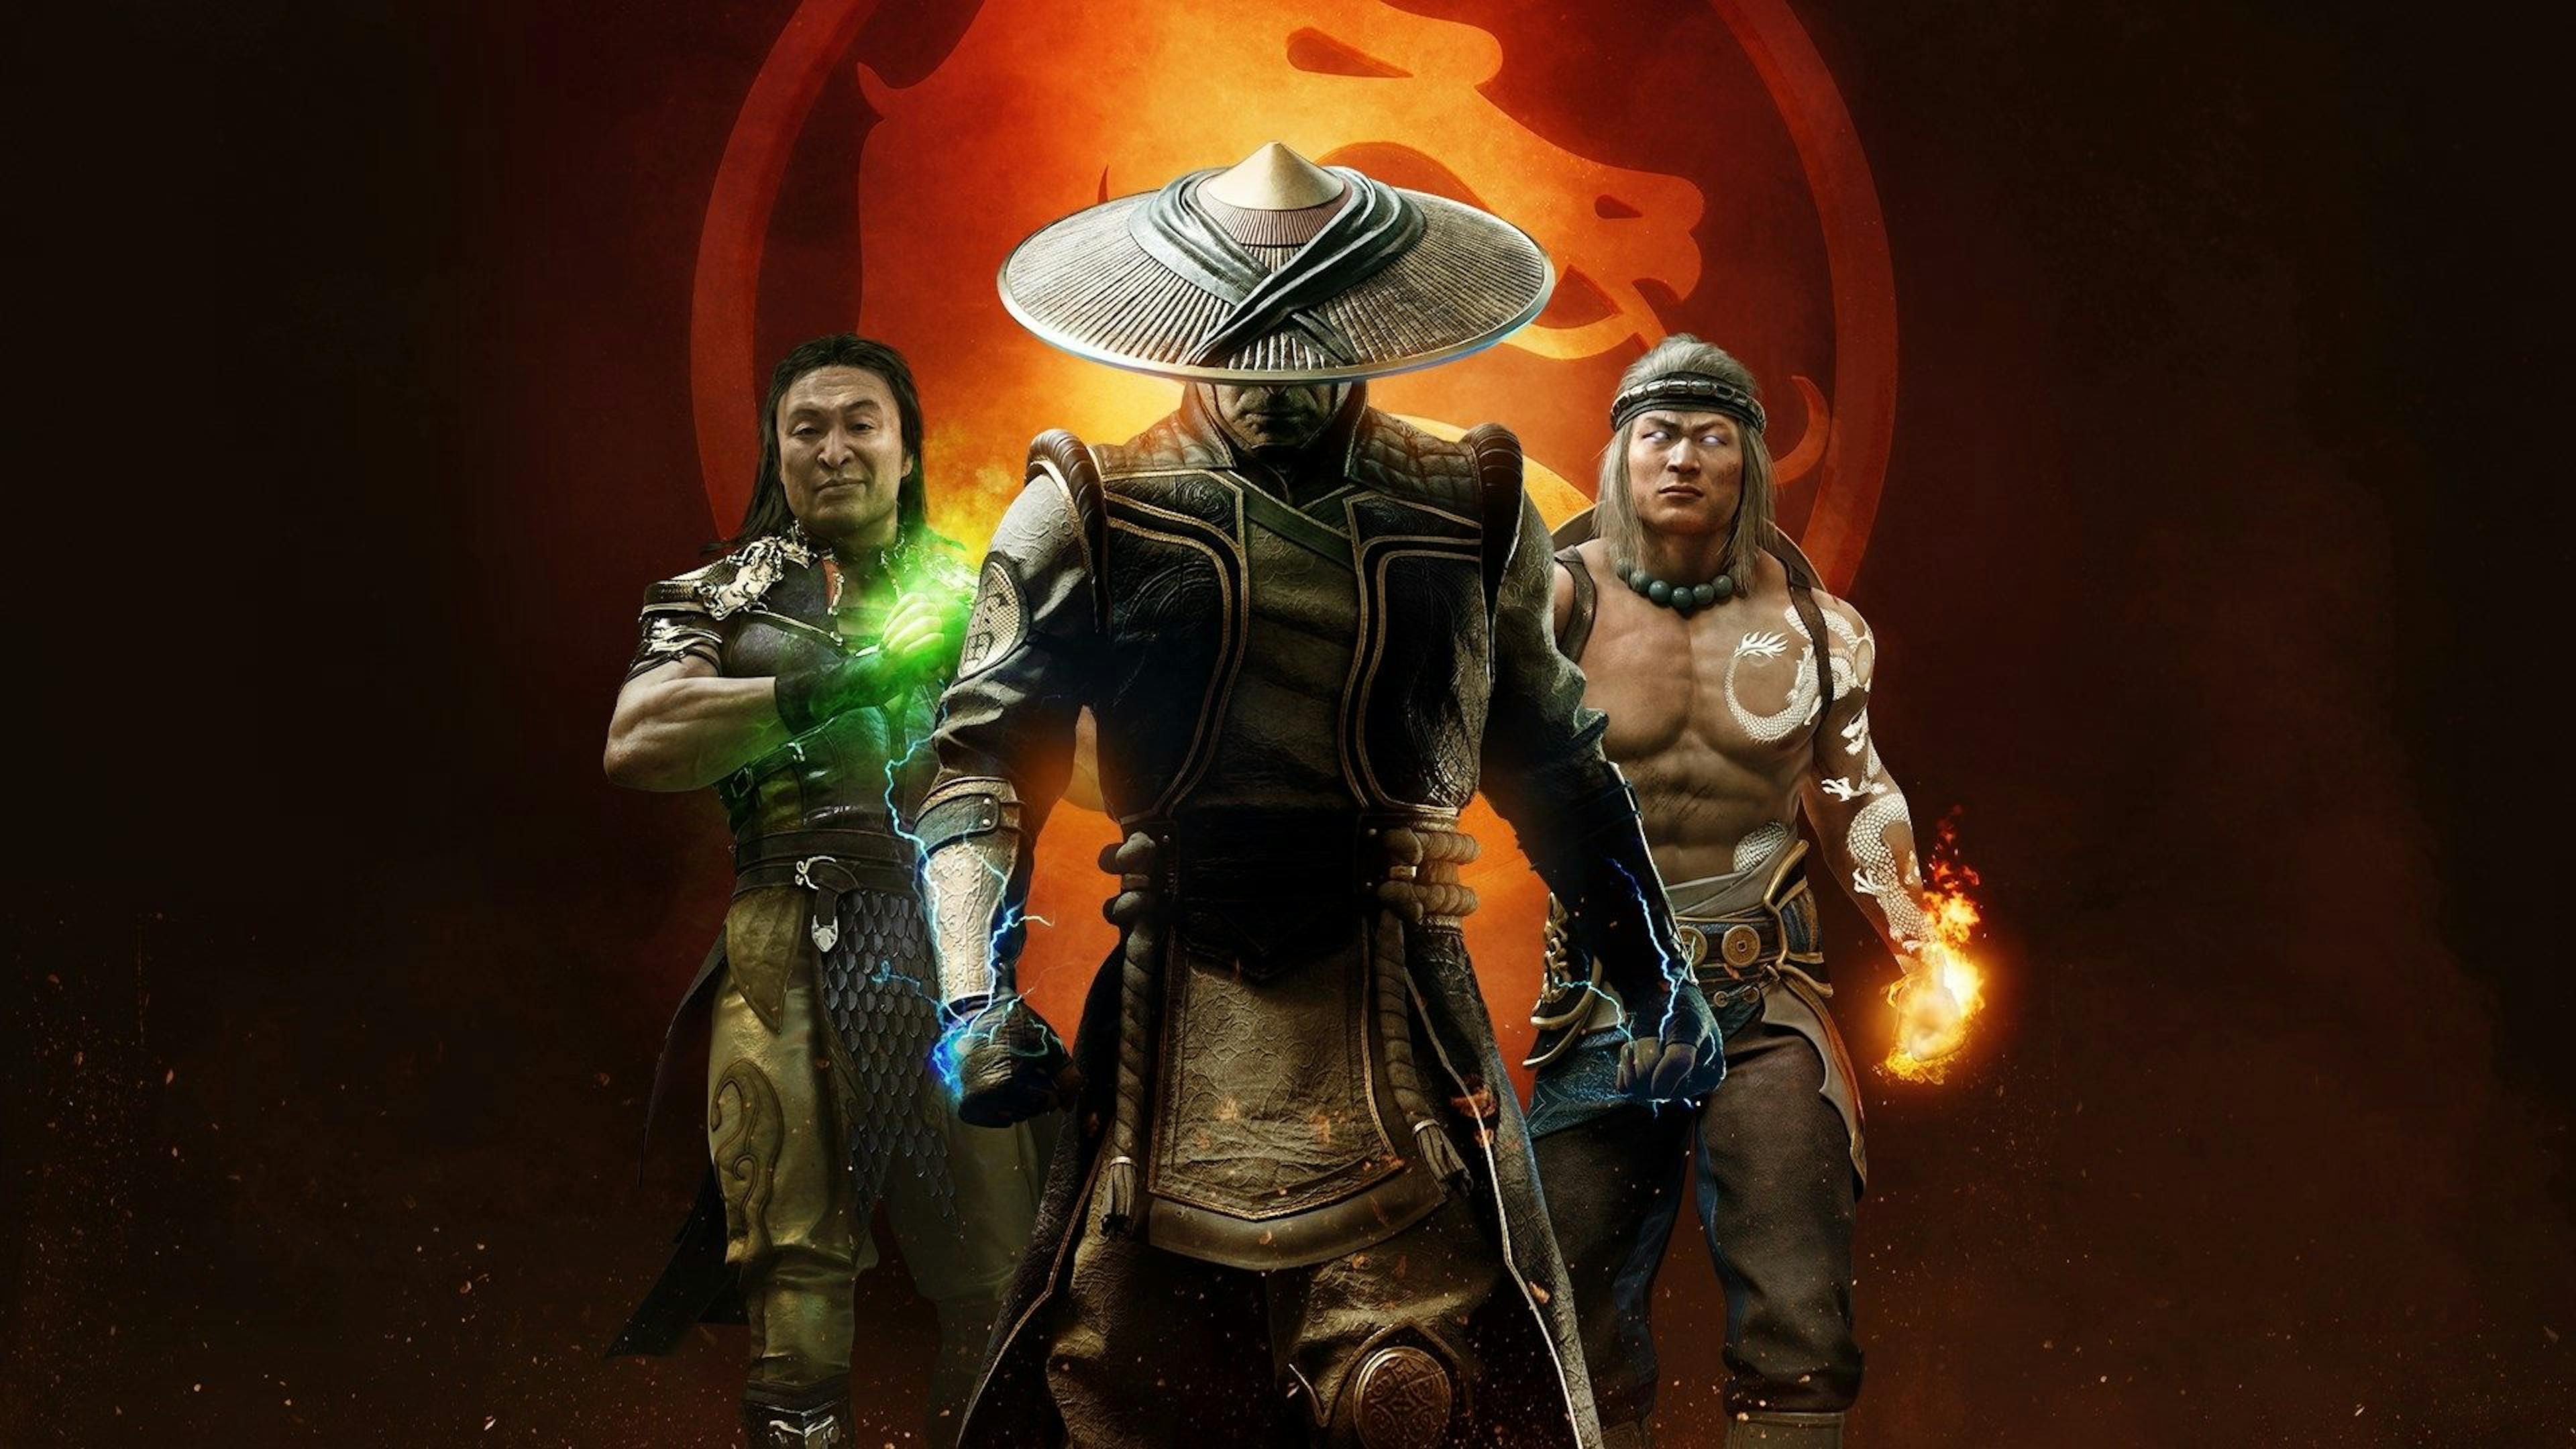 featured image - The New Mortal Kombat Movie in 2021: 5 Characters We Want to See